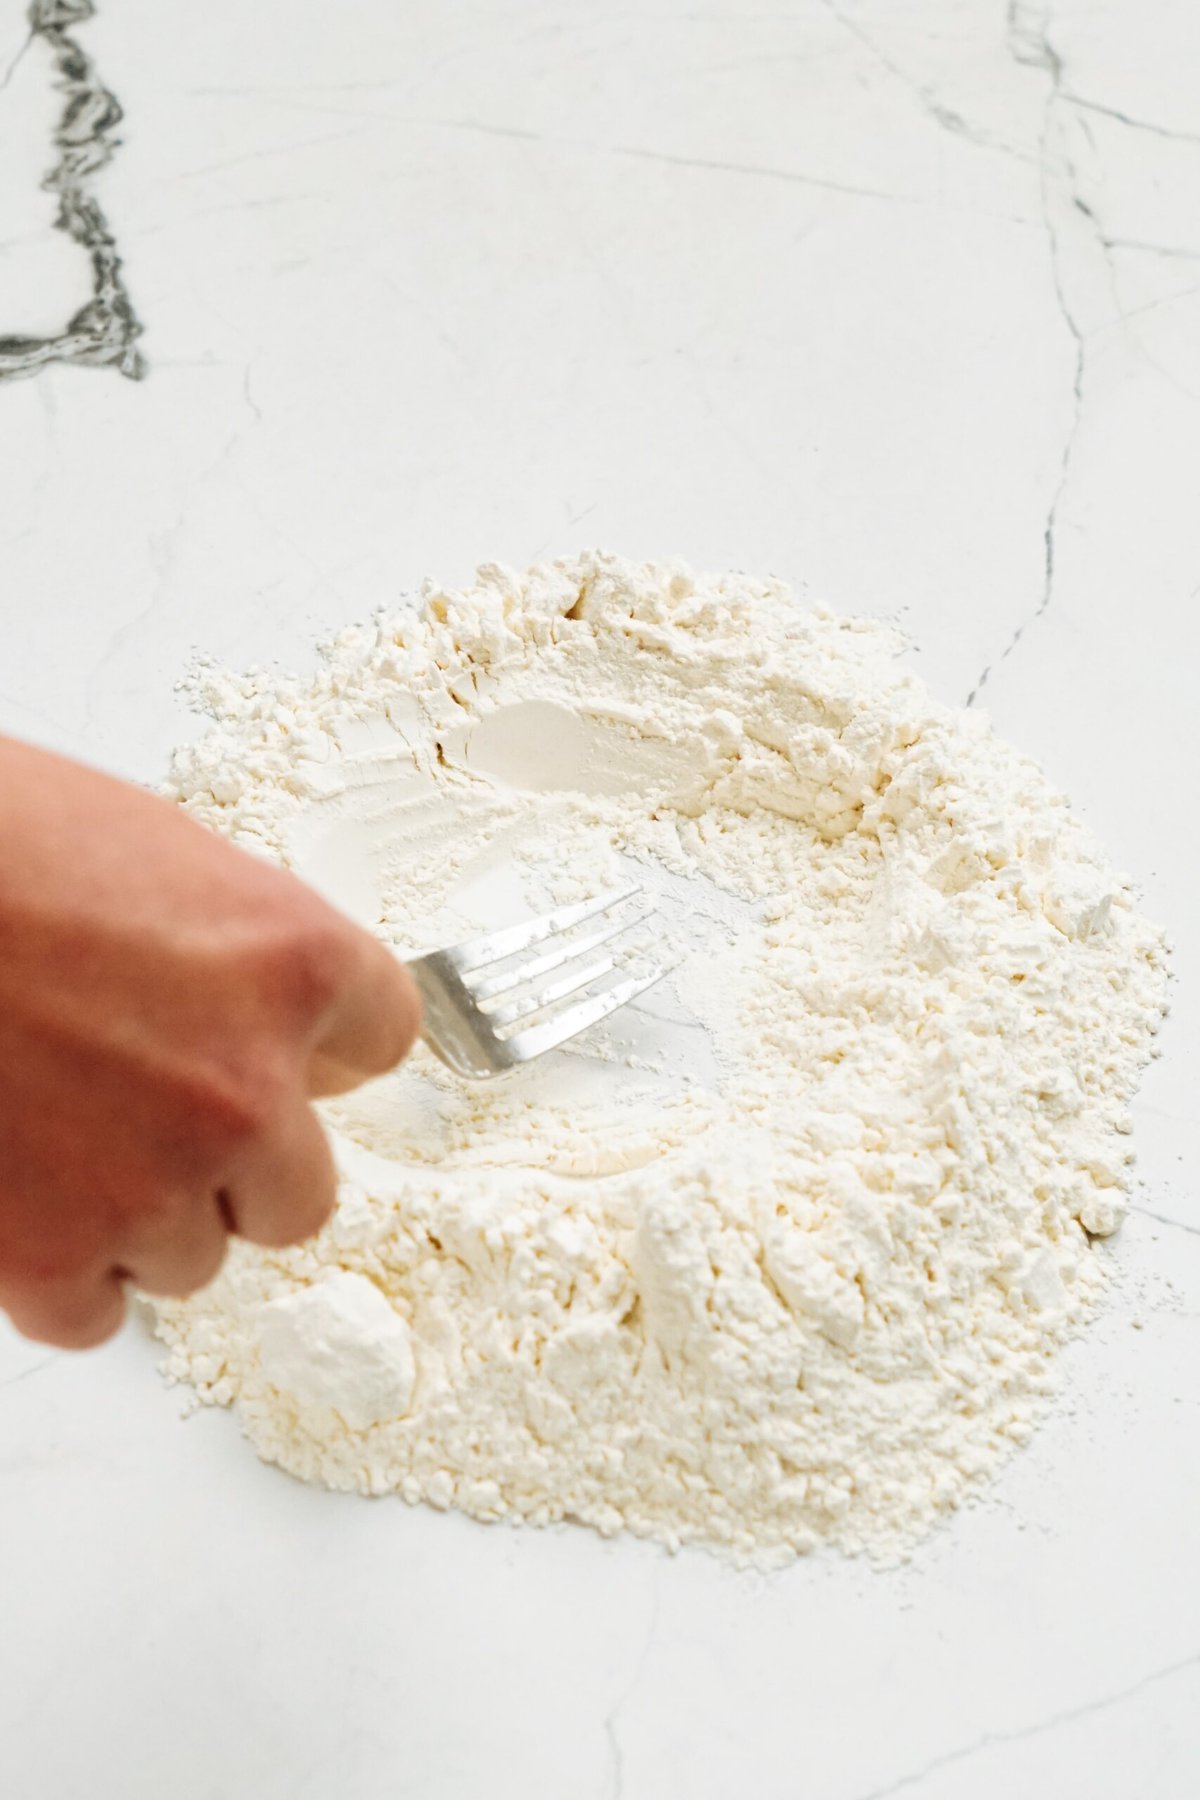 A person using a fork to mix flour on the counter